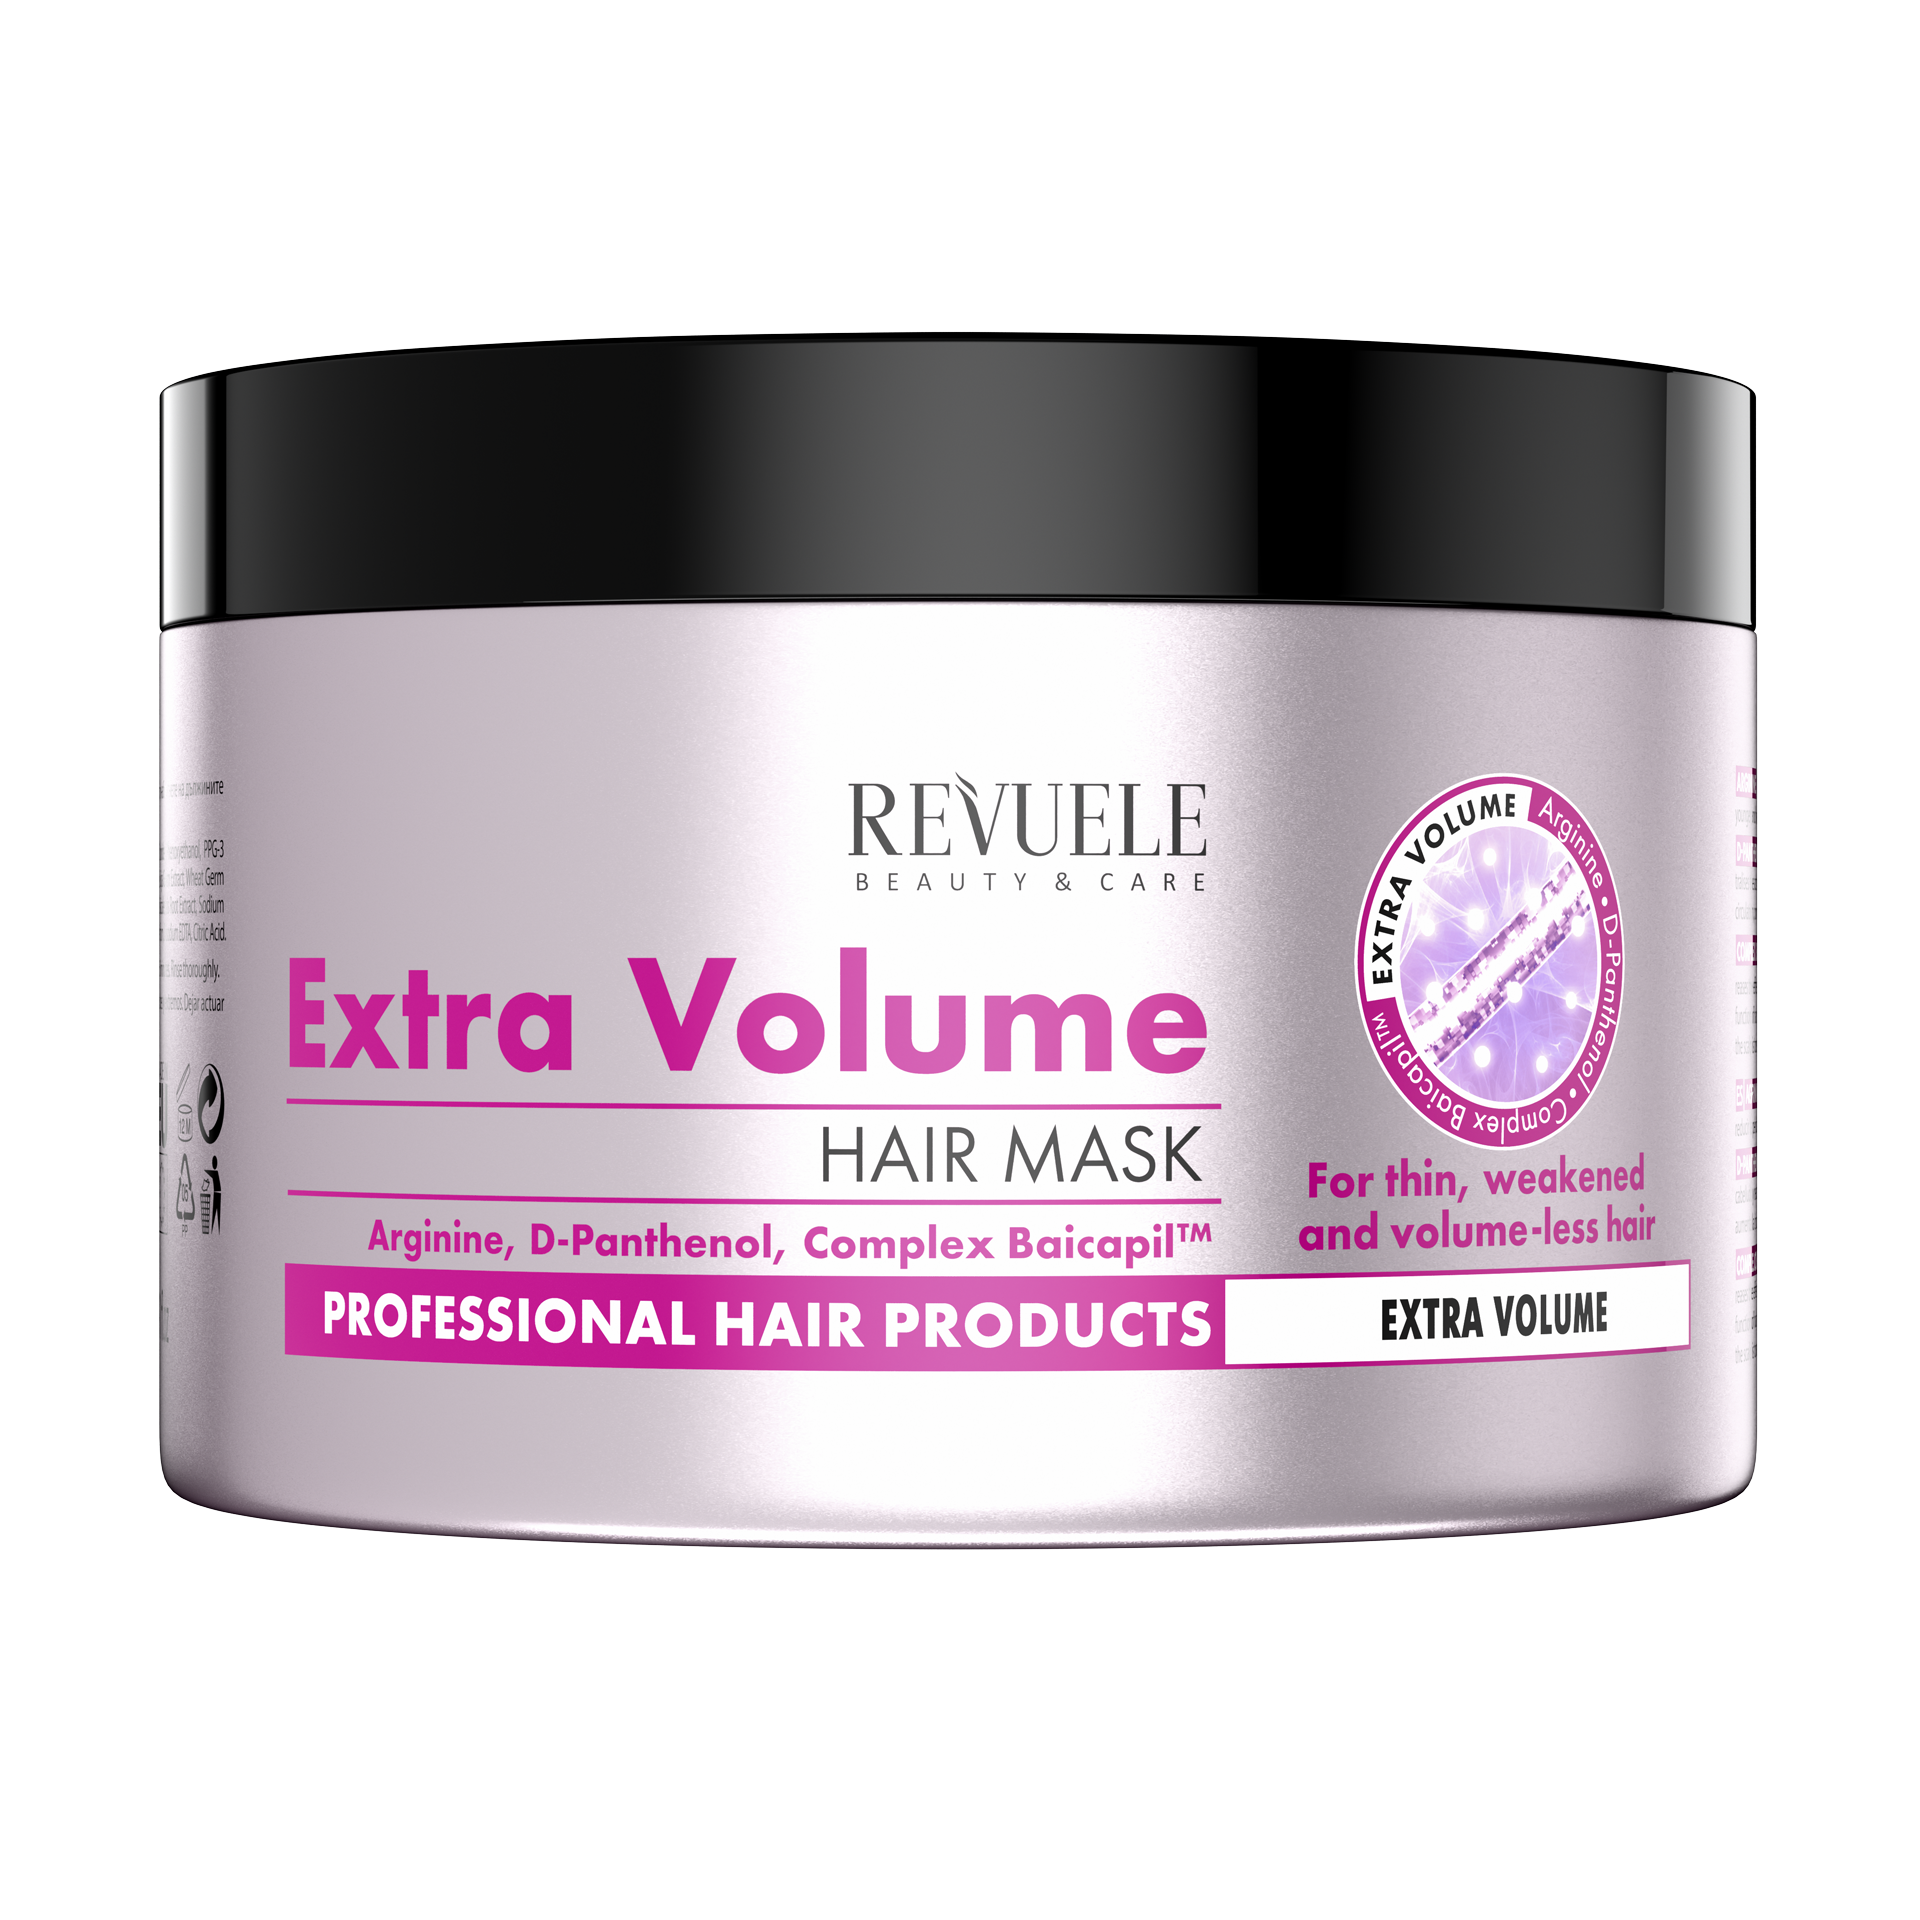 REVUELE PROFESSIONAL HAIR PRODUCTS Hair Mask Extra Volume | Revuele